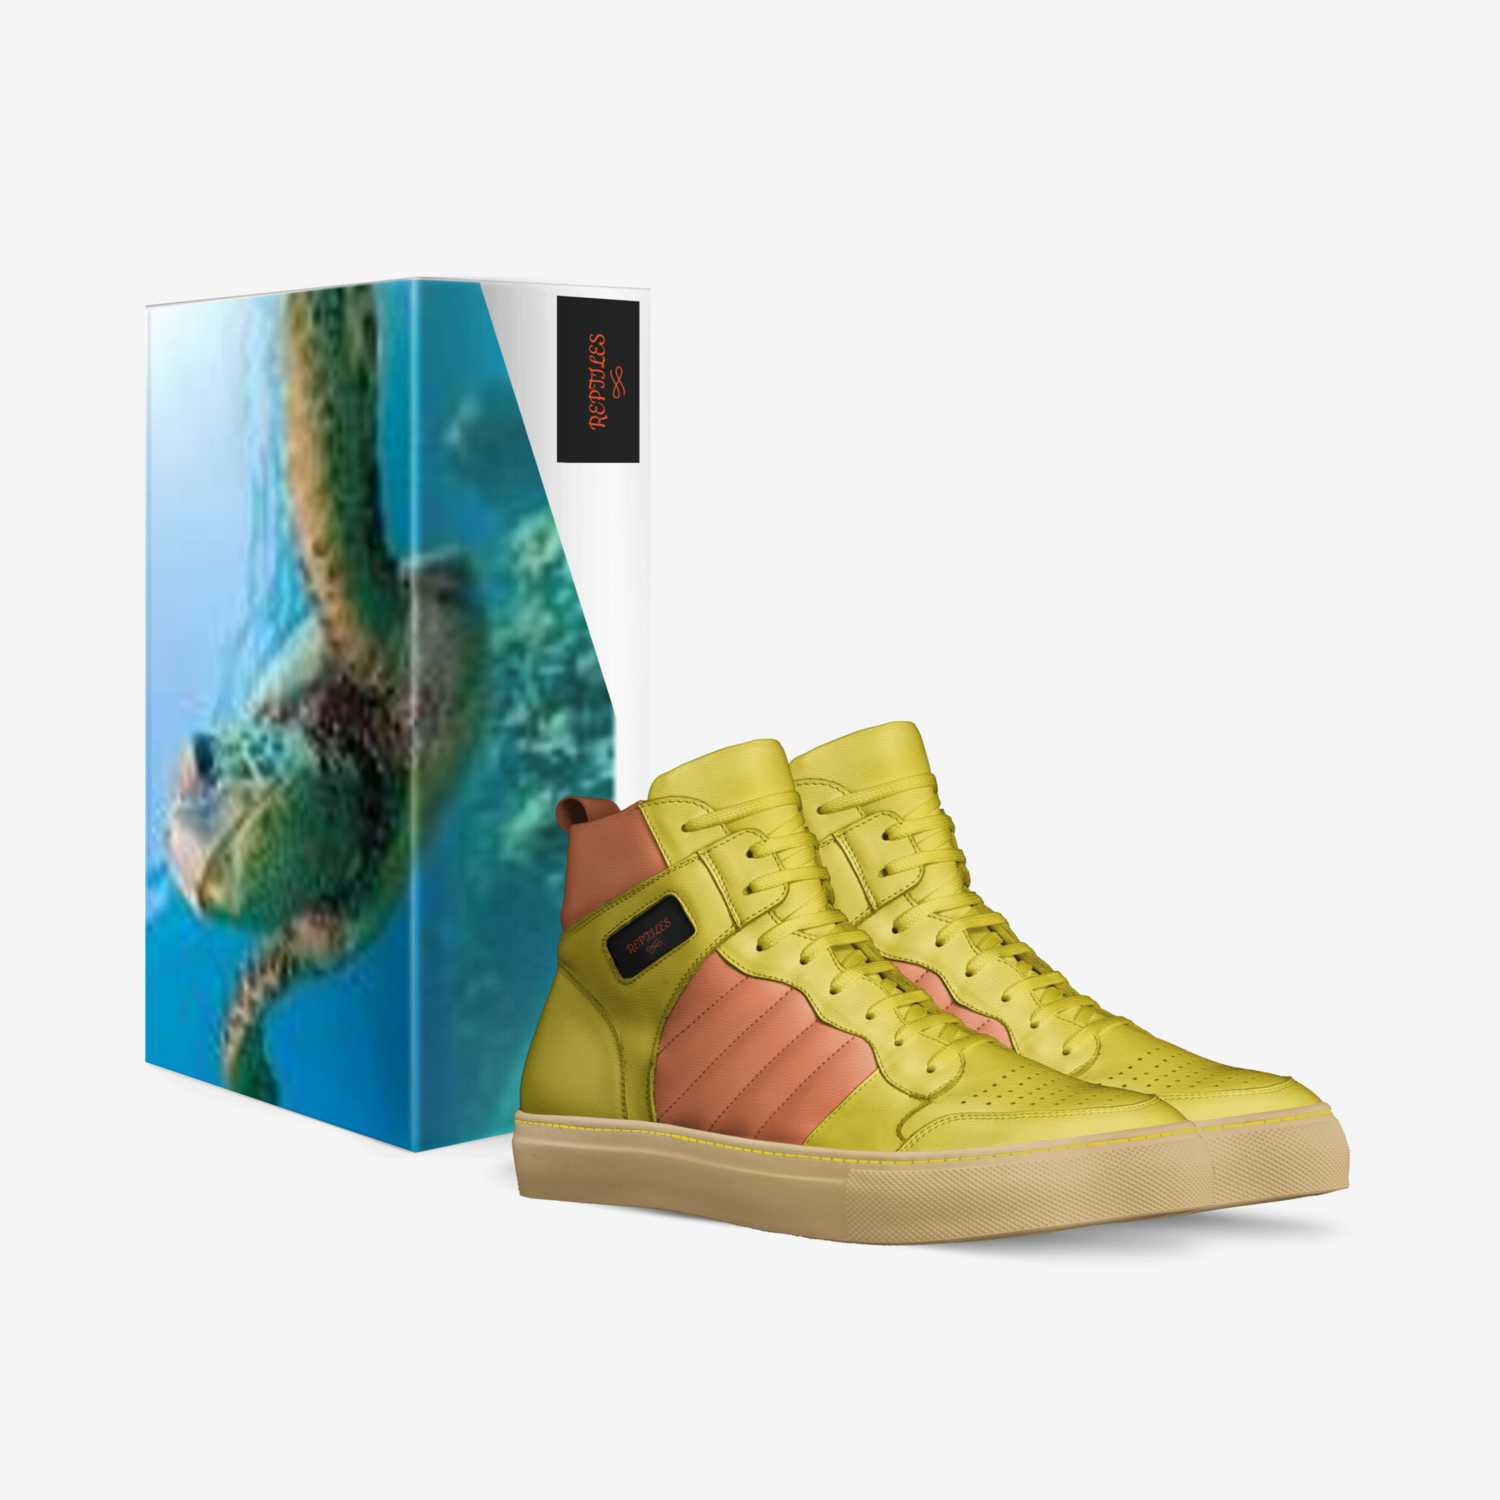 REPTILES custom made in Italy shoes by Ian Griffith | Box view